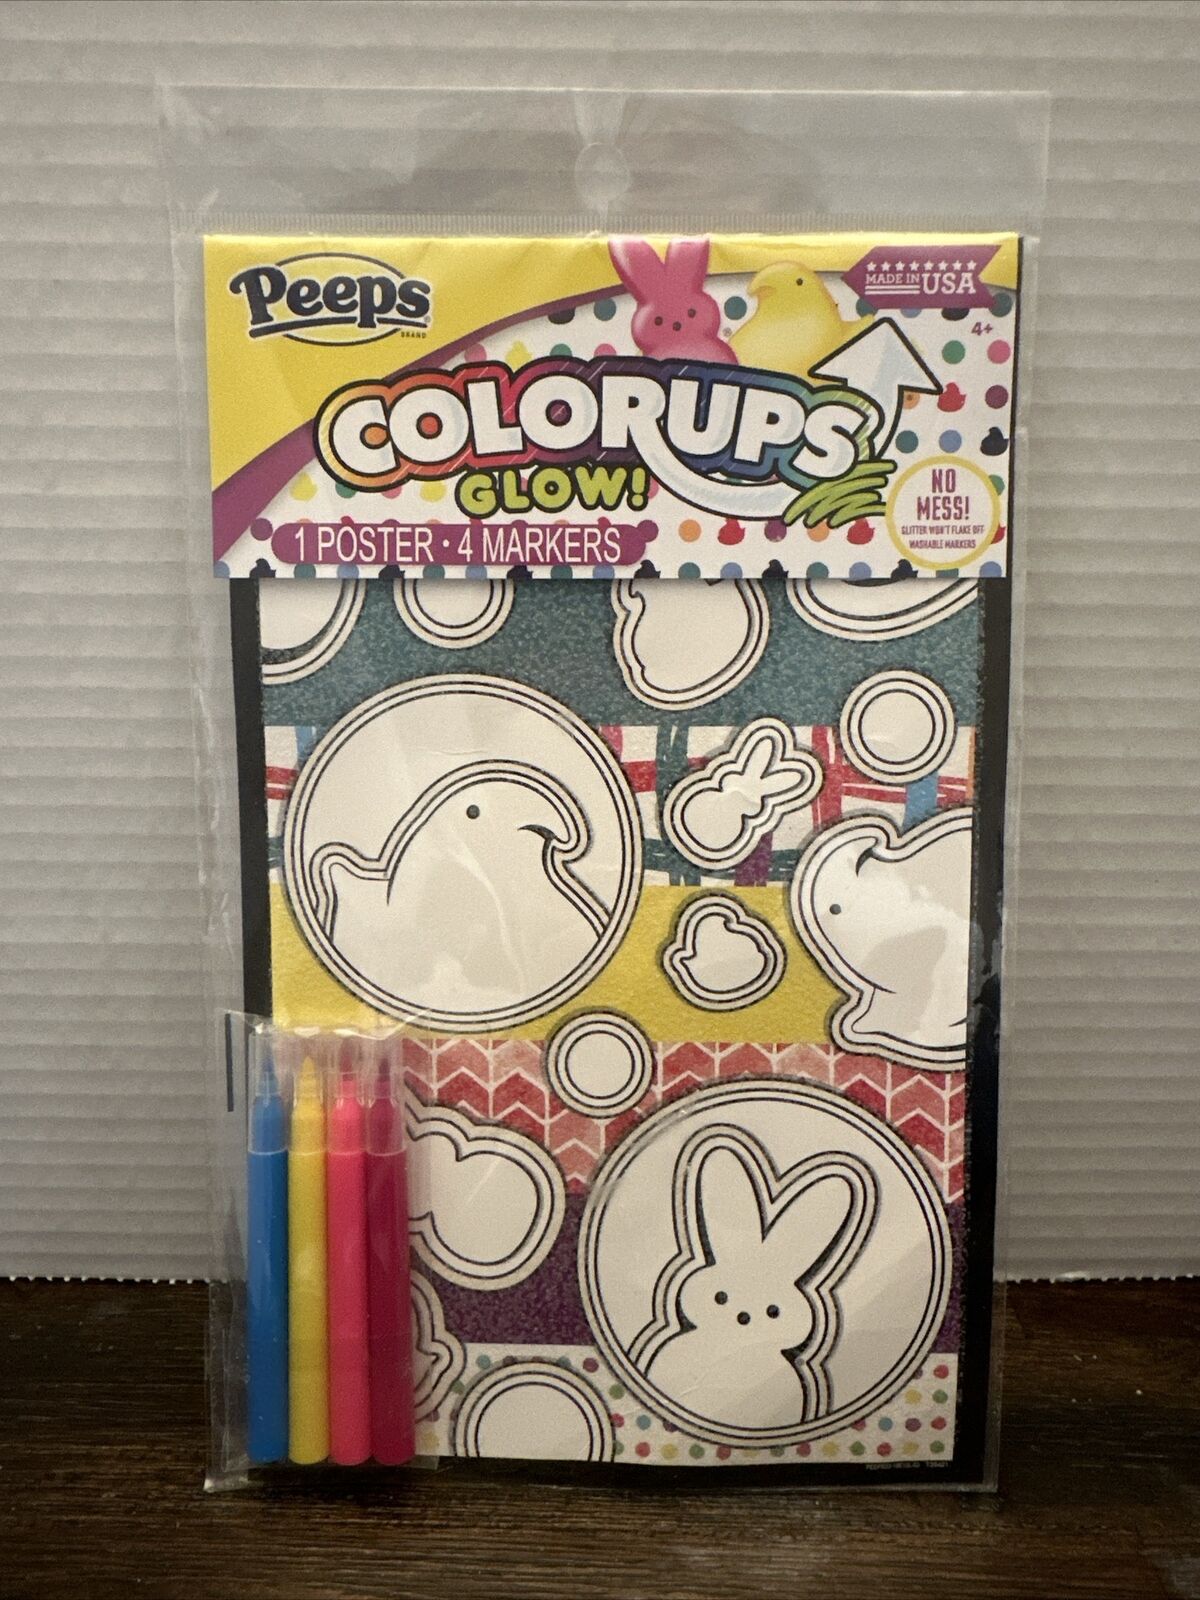 NEW PEEPS Just Born COLORUPS GLOW GLITTER POSTER with 4 MARKERS Fun Easter Craft